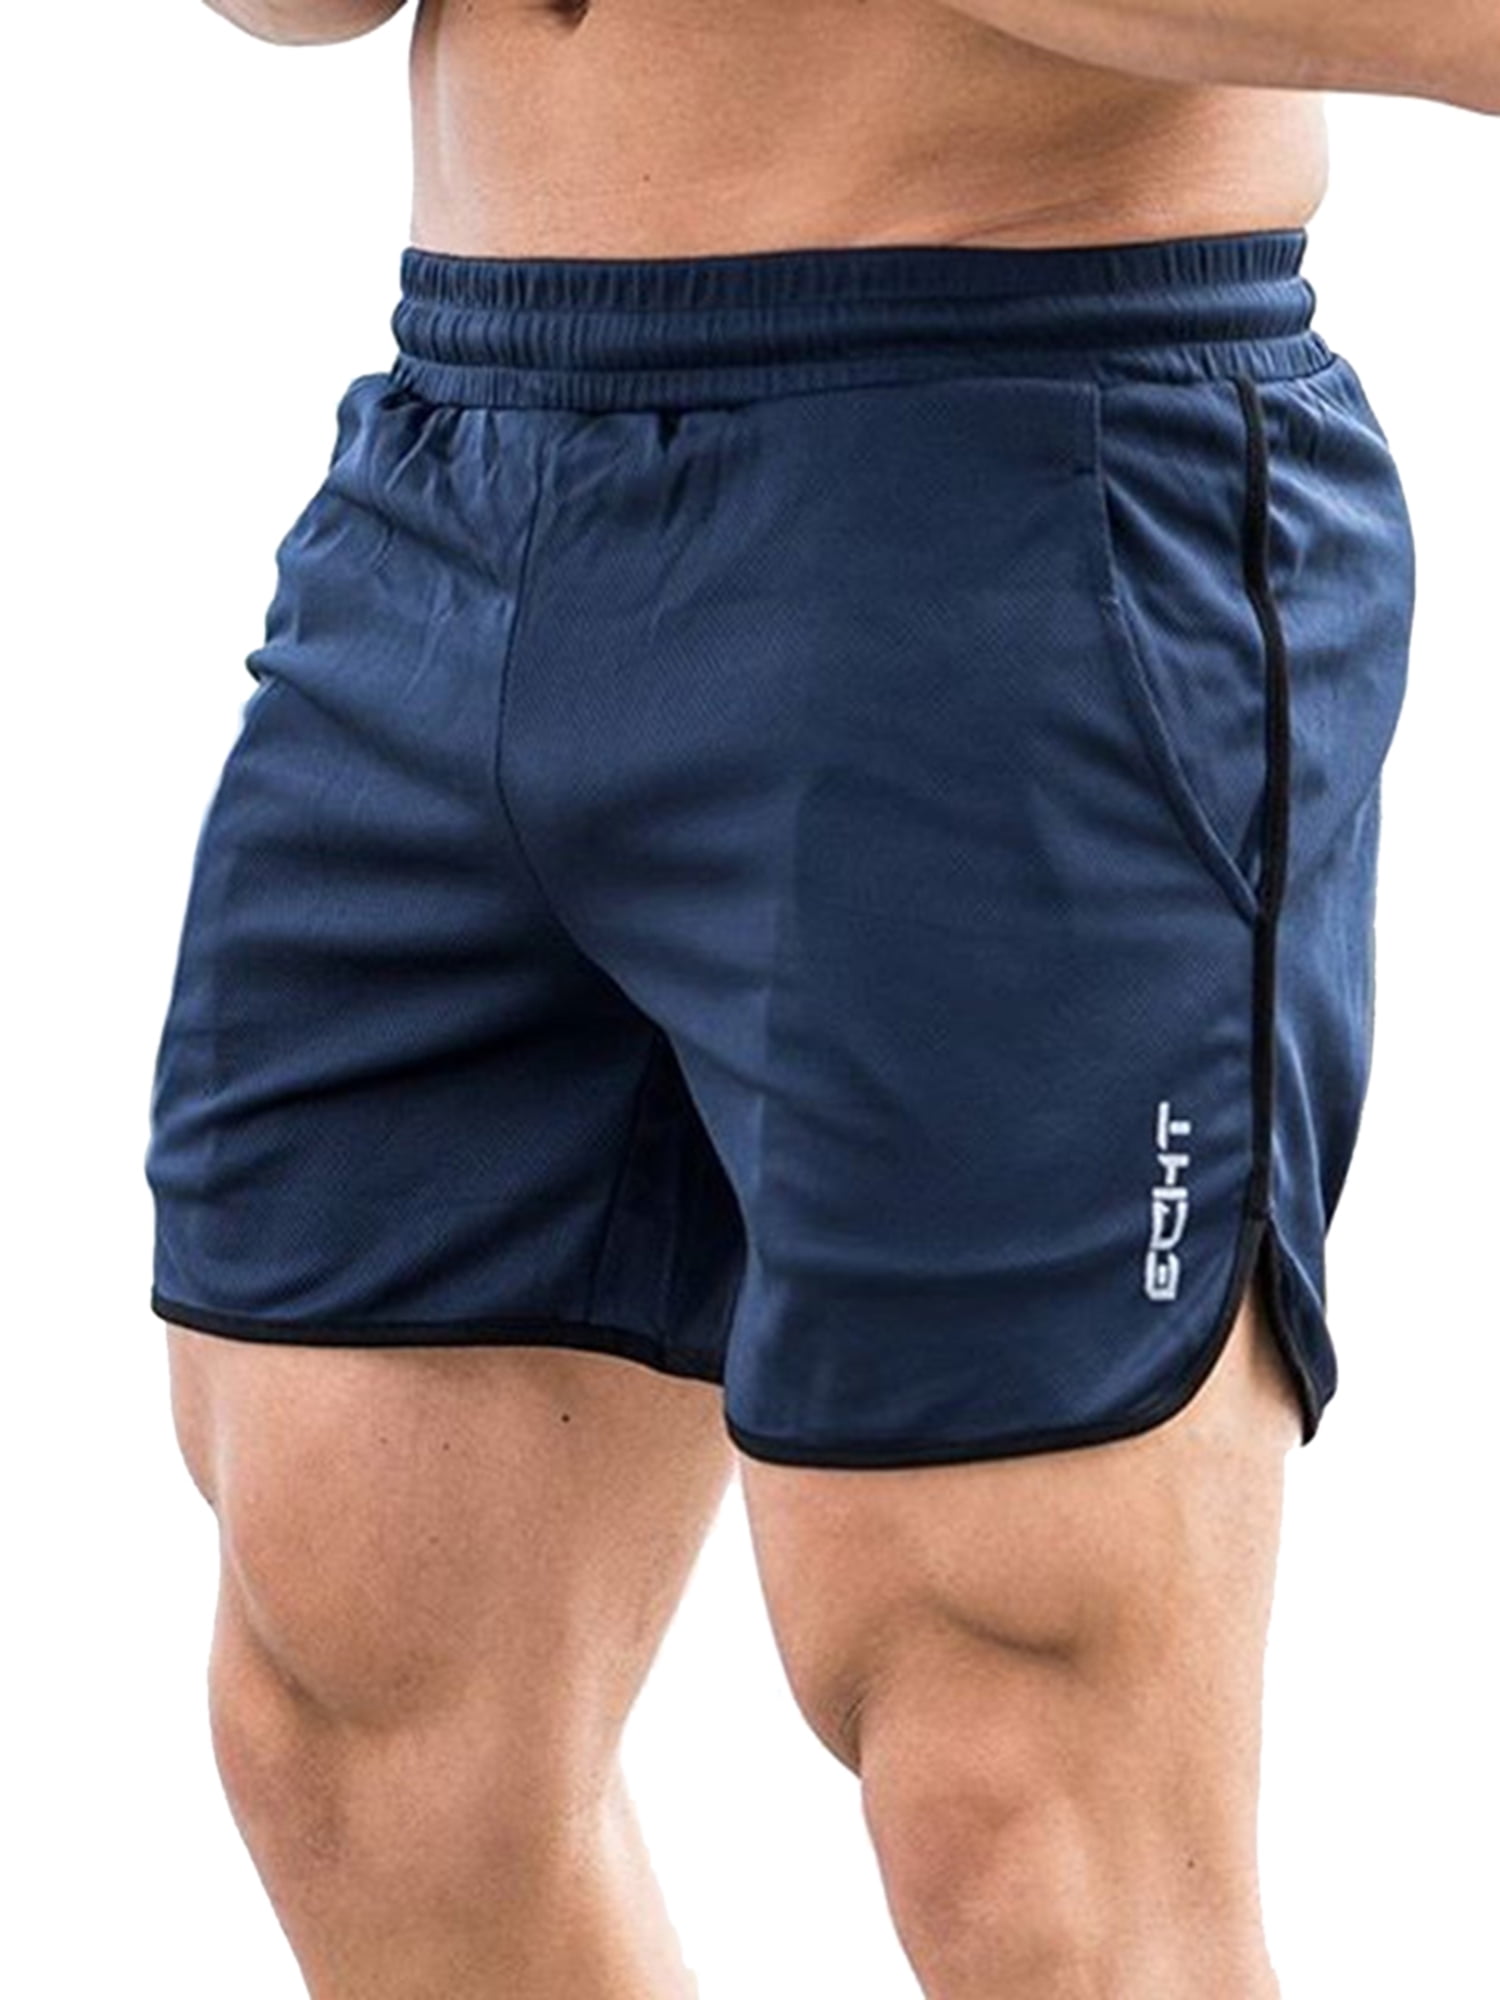 Details about   Jako Sports Training Running Jog Workout Mens Kids Childrens Shorts with Pockets 